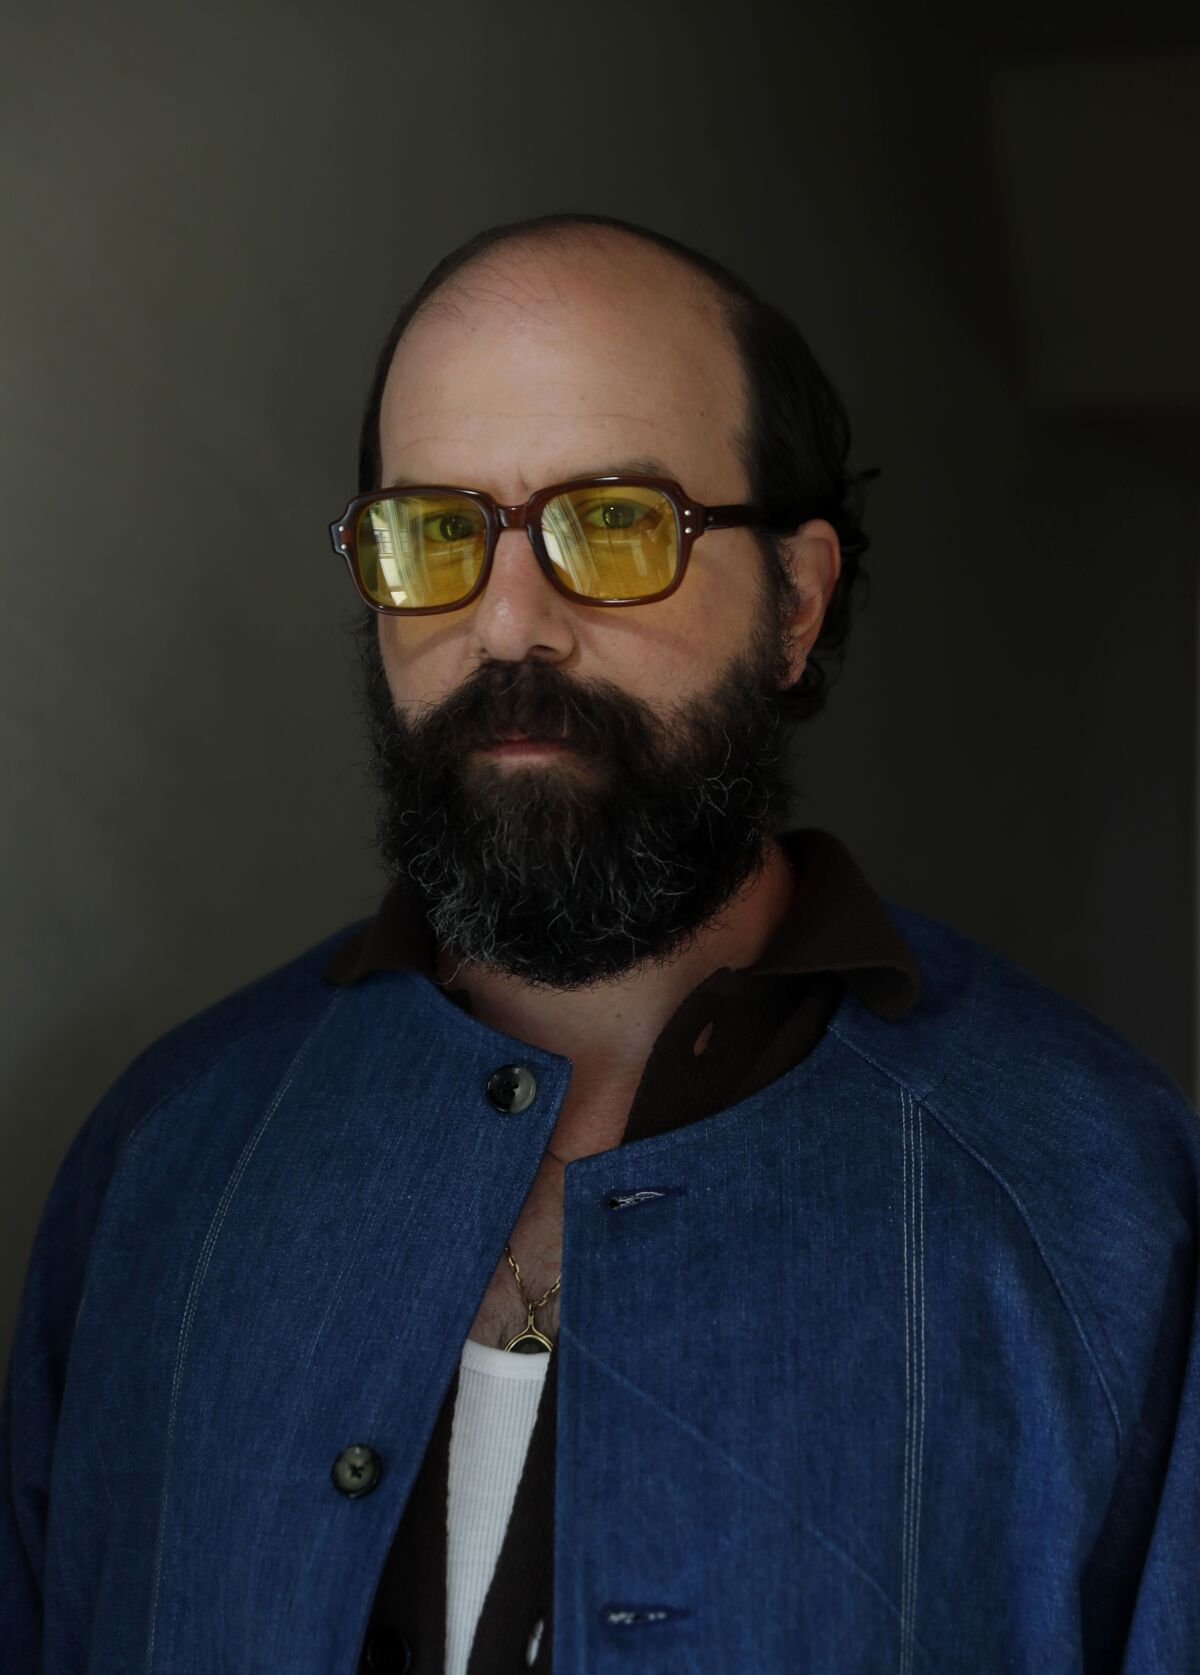 The actor Brett Gelman poses for a photograph.